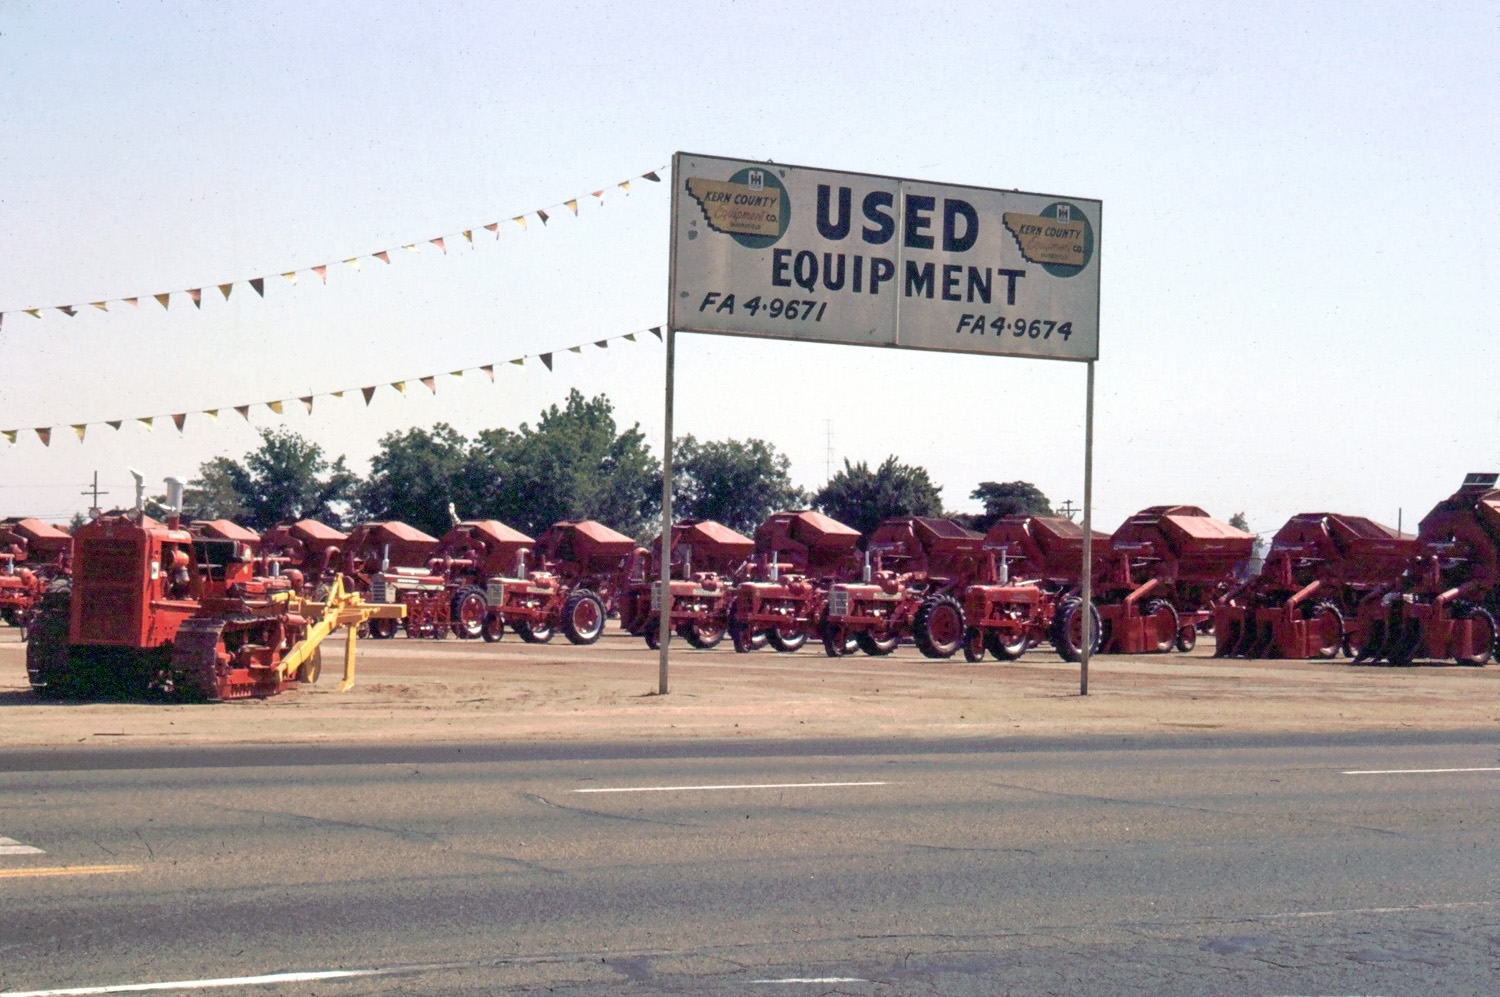 Farm equipment for sale, Bakerfield, CA June 1966. From a Kodachrome slide, found in thrift store 9-14-2012. View full size.